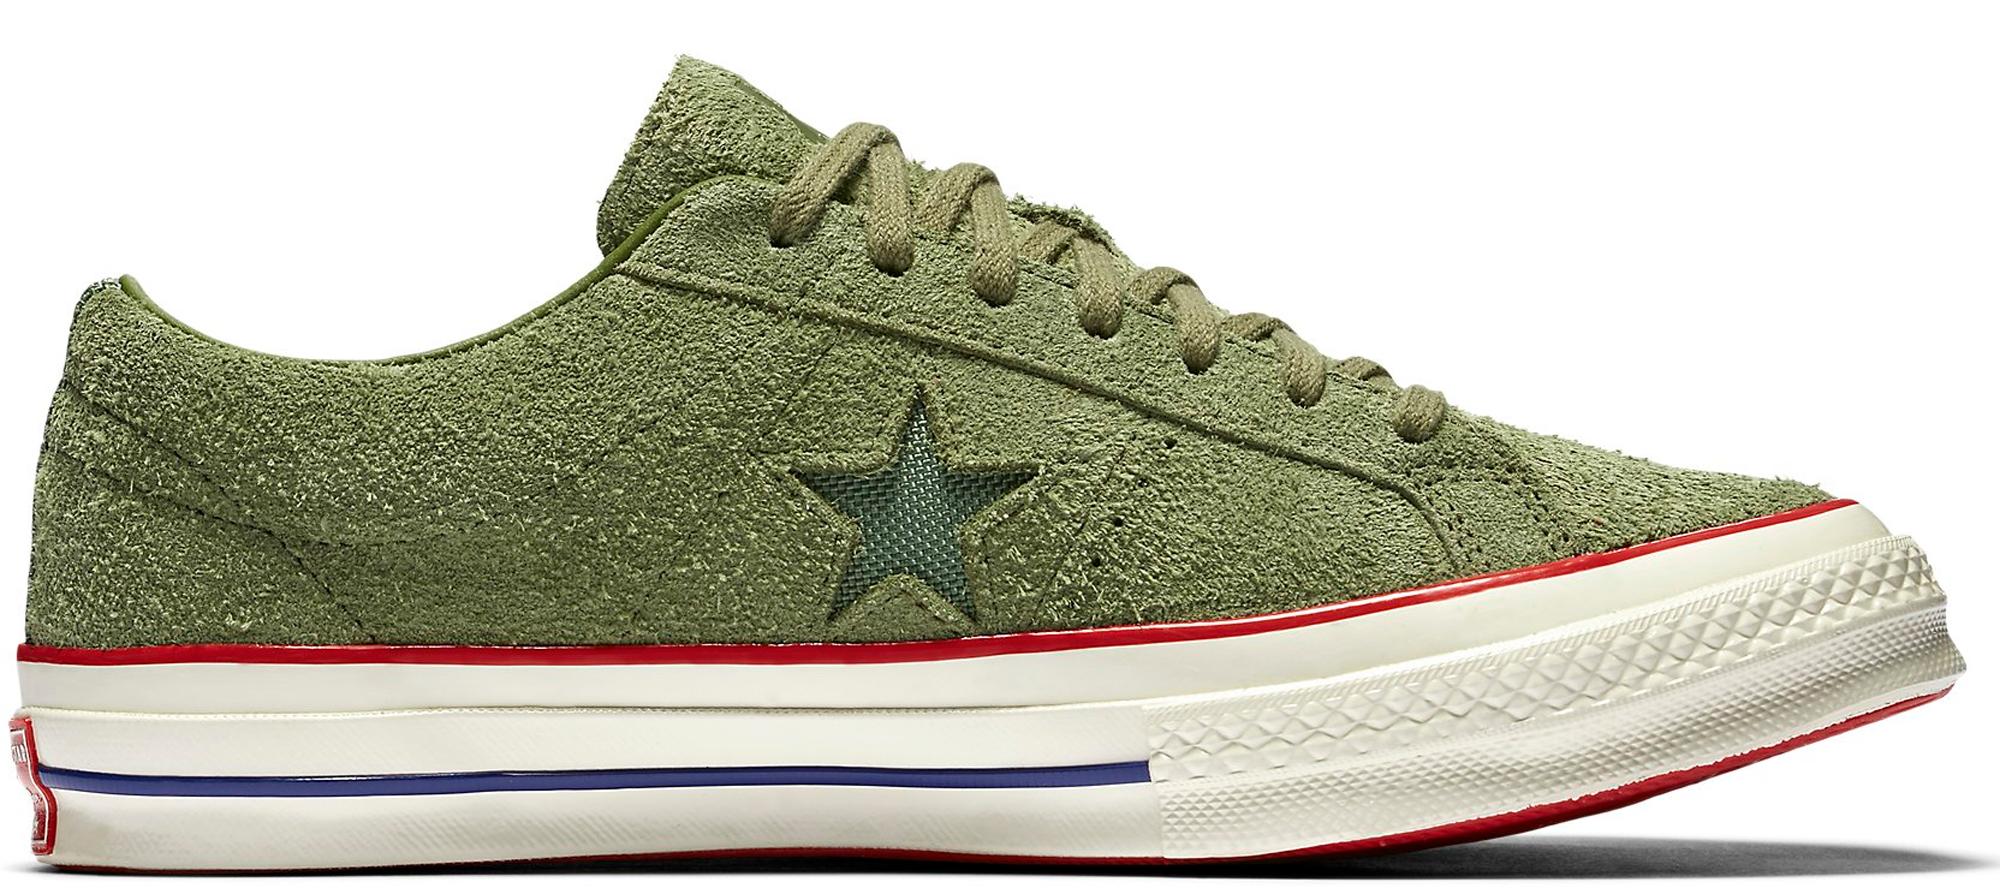 Undefeated x Converse One Star Ox Olive Suede